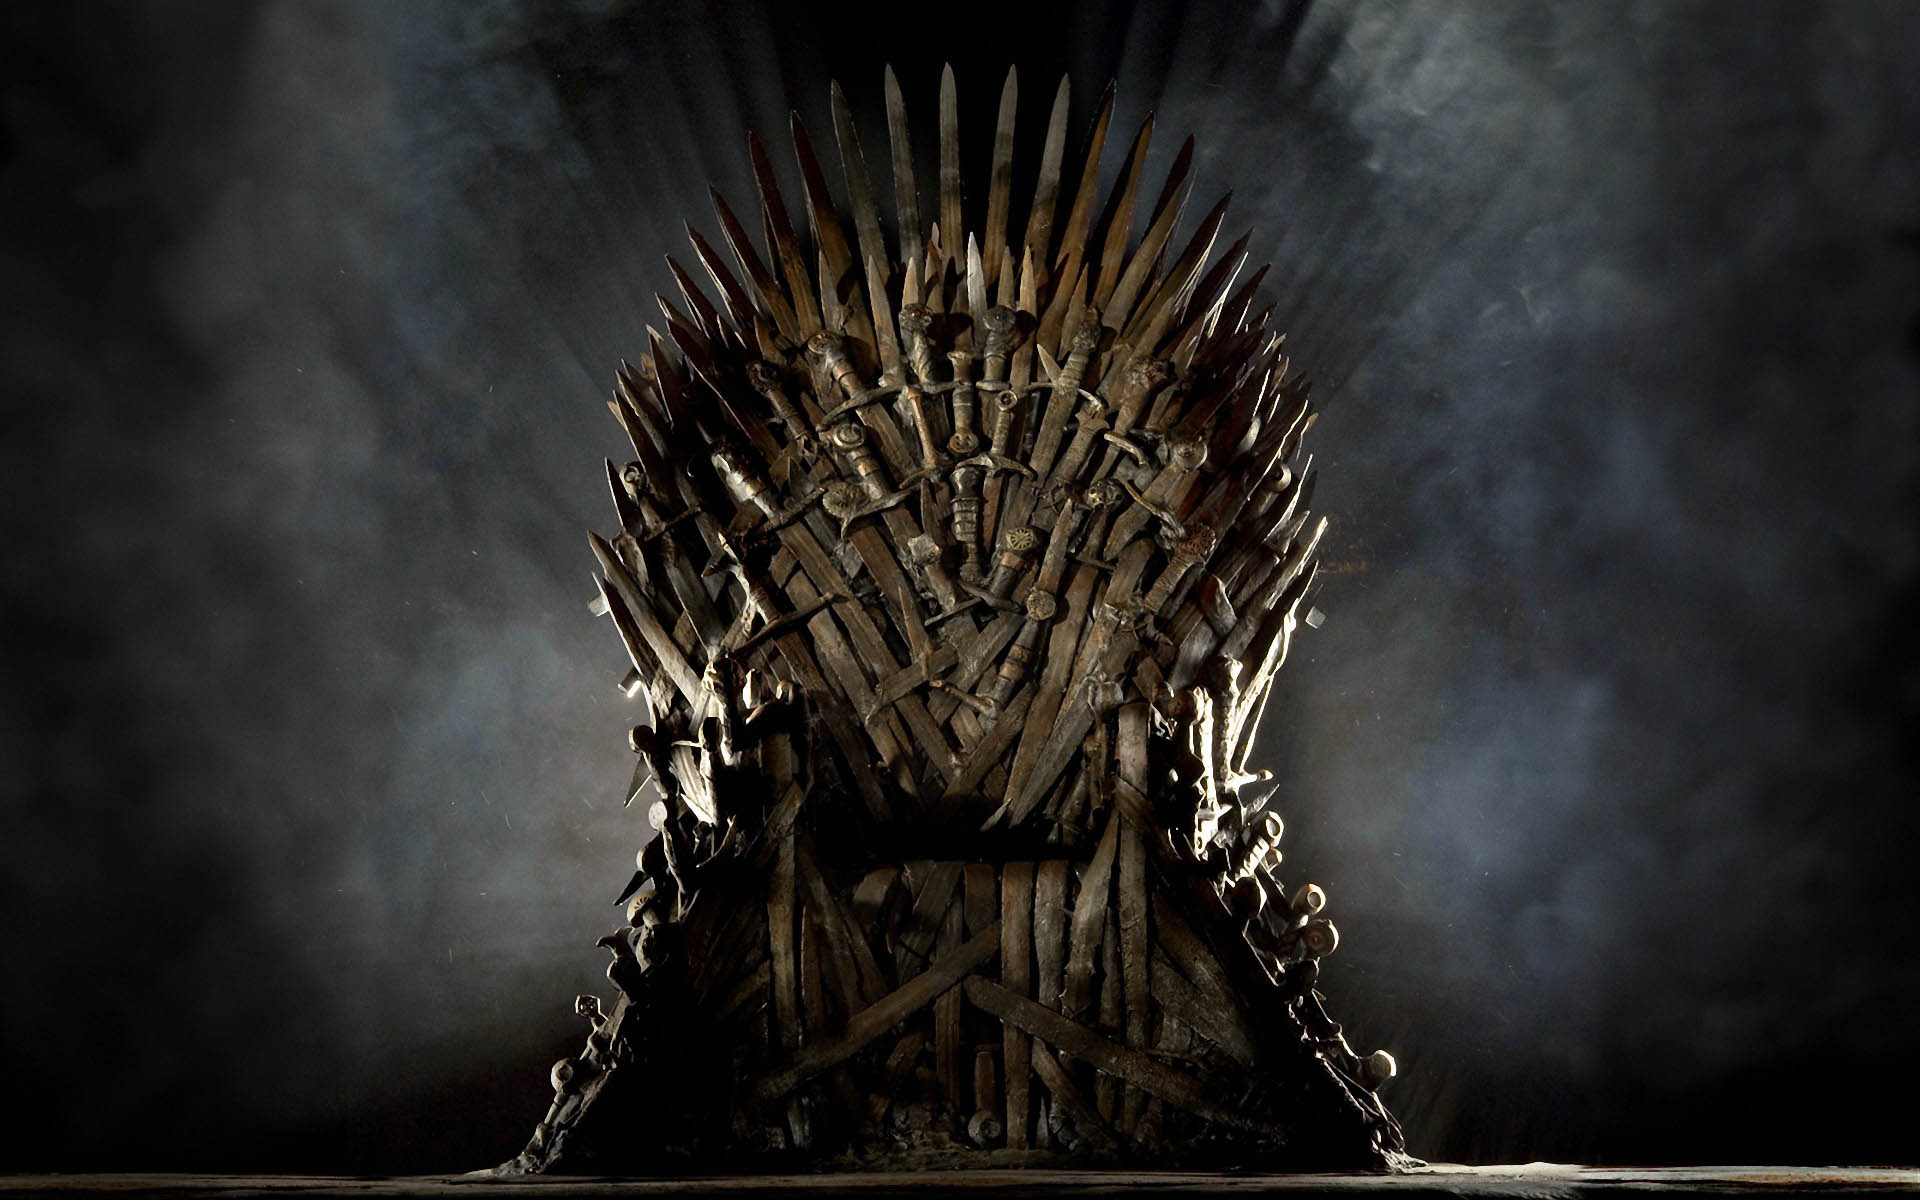 Everything you need to know to start watching Game of Thrones